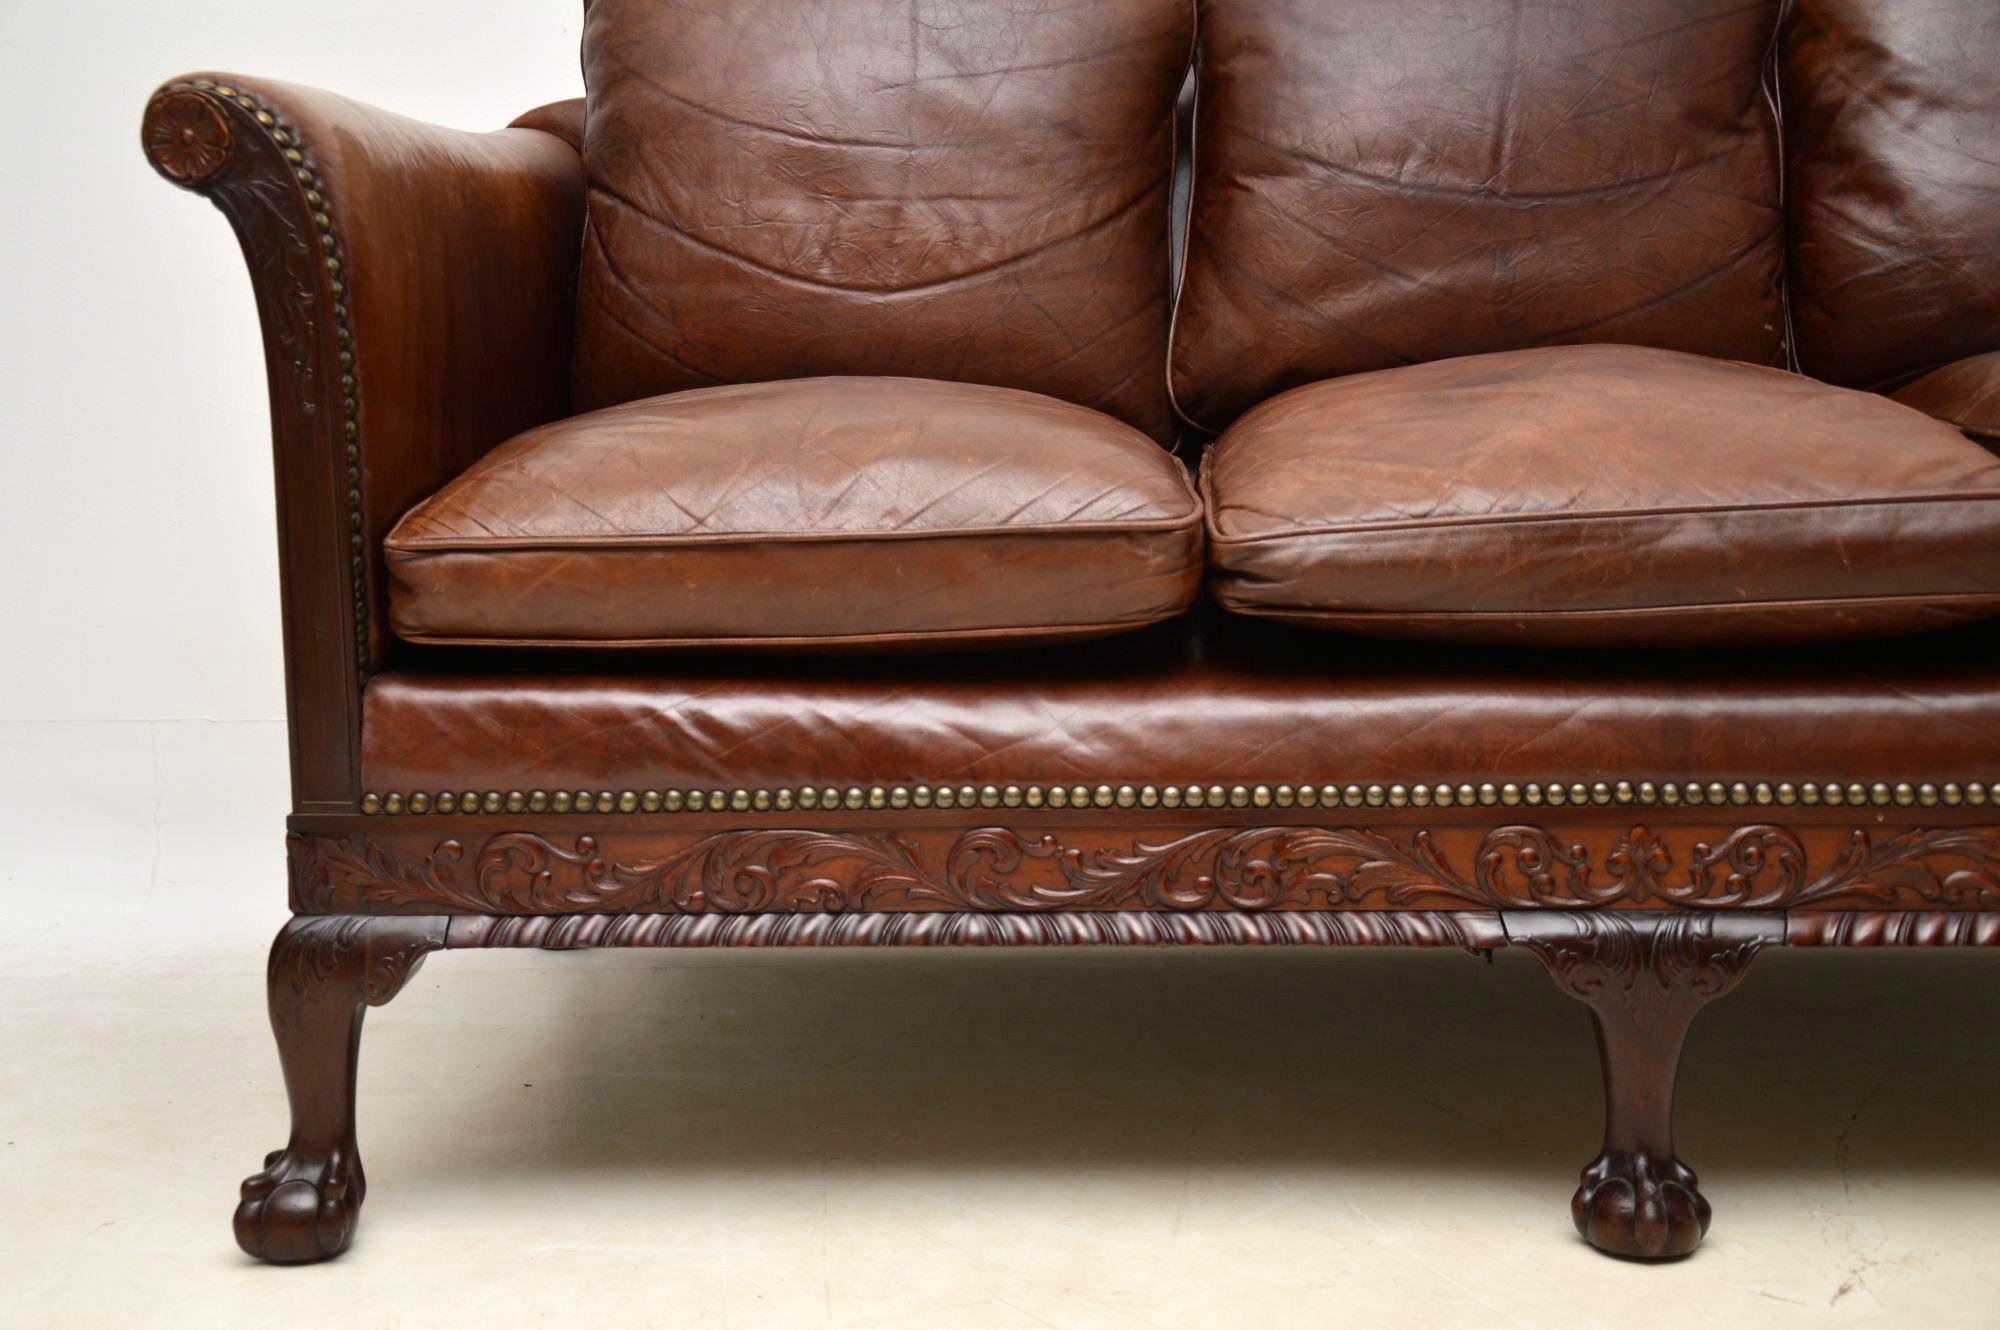 This stunning Swedish antique mahogany sofa with leather upholstery is of Chippendale design & I would date it to around the 1890-1910 period. It’s in lovely original condition, with feather filled cushions & I believe the leather could be original.